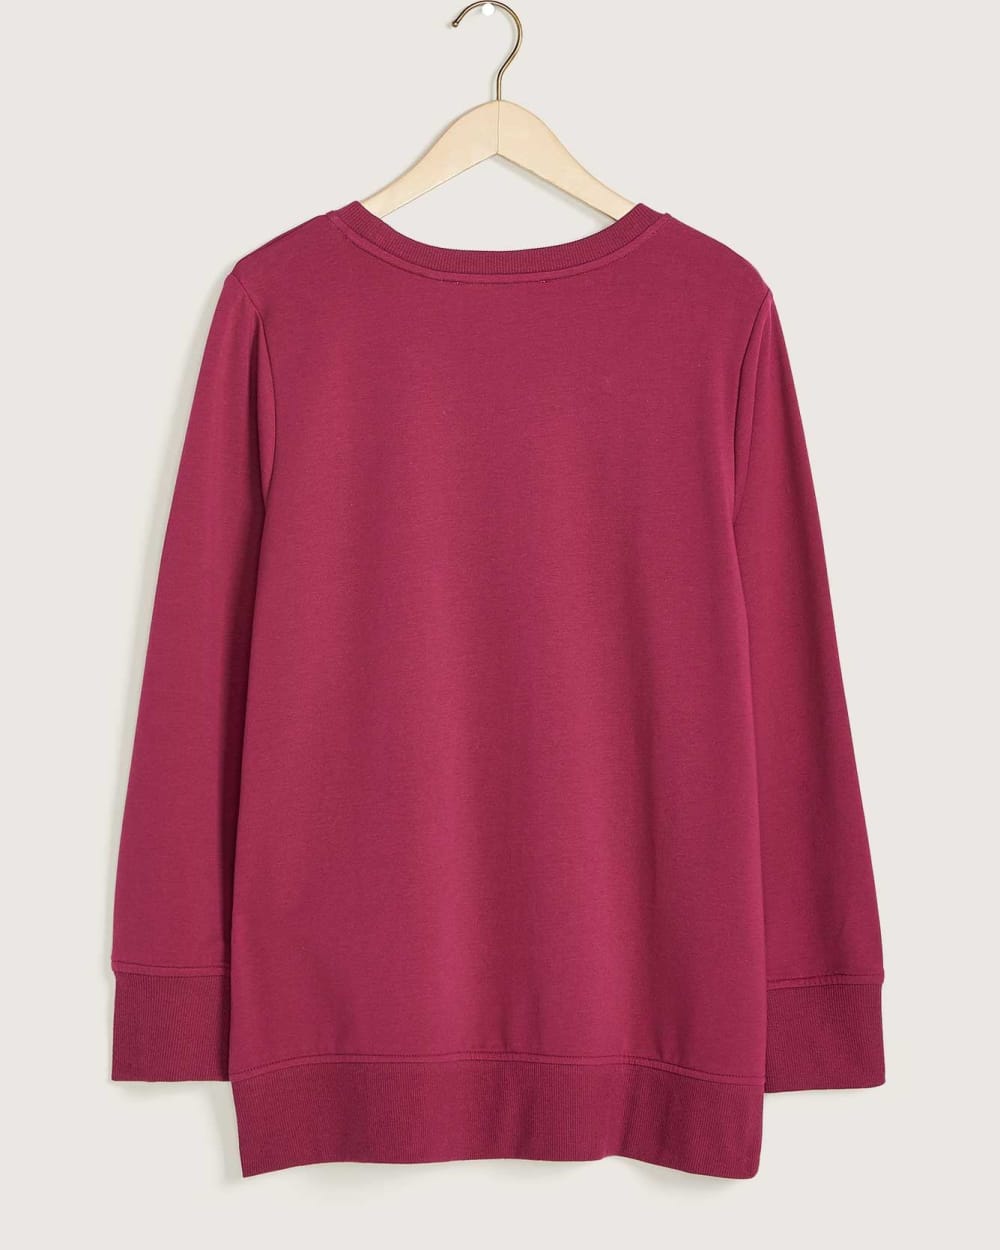 Petite, French Terry Sweatshirt - In Every Story